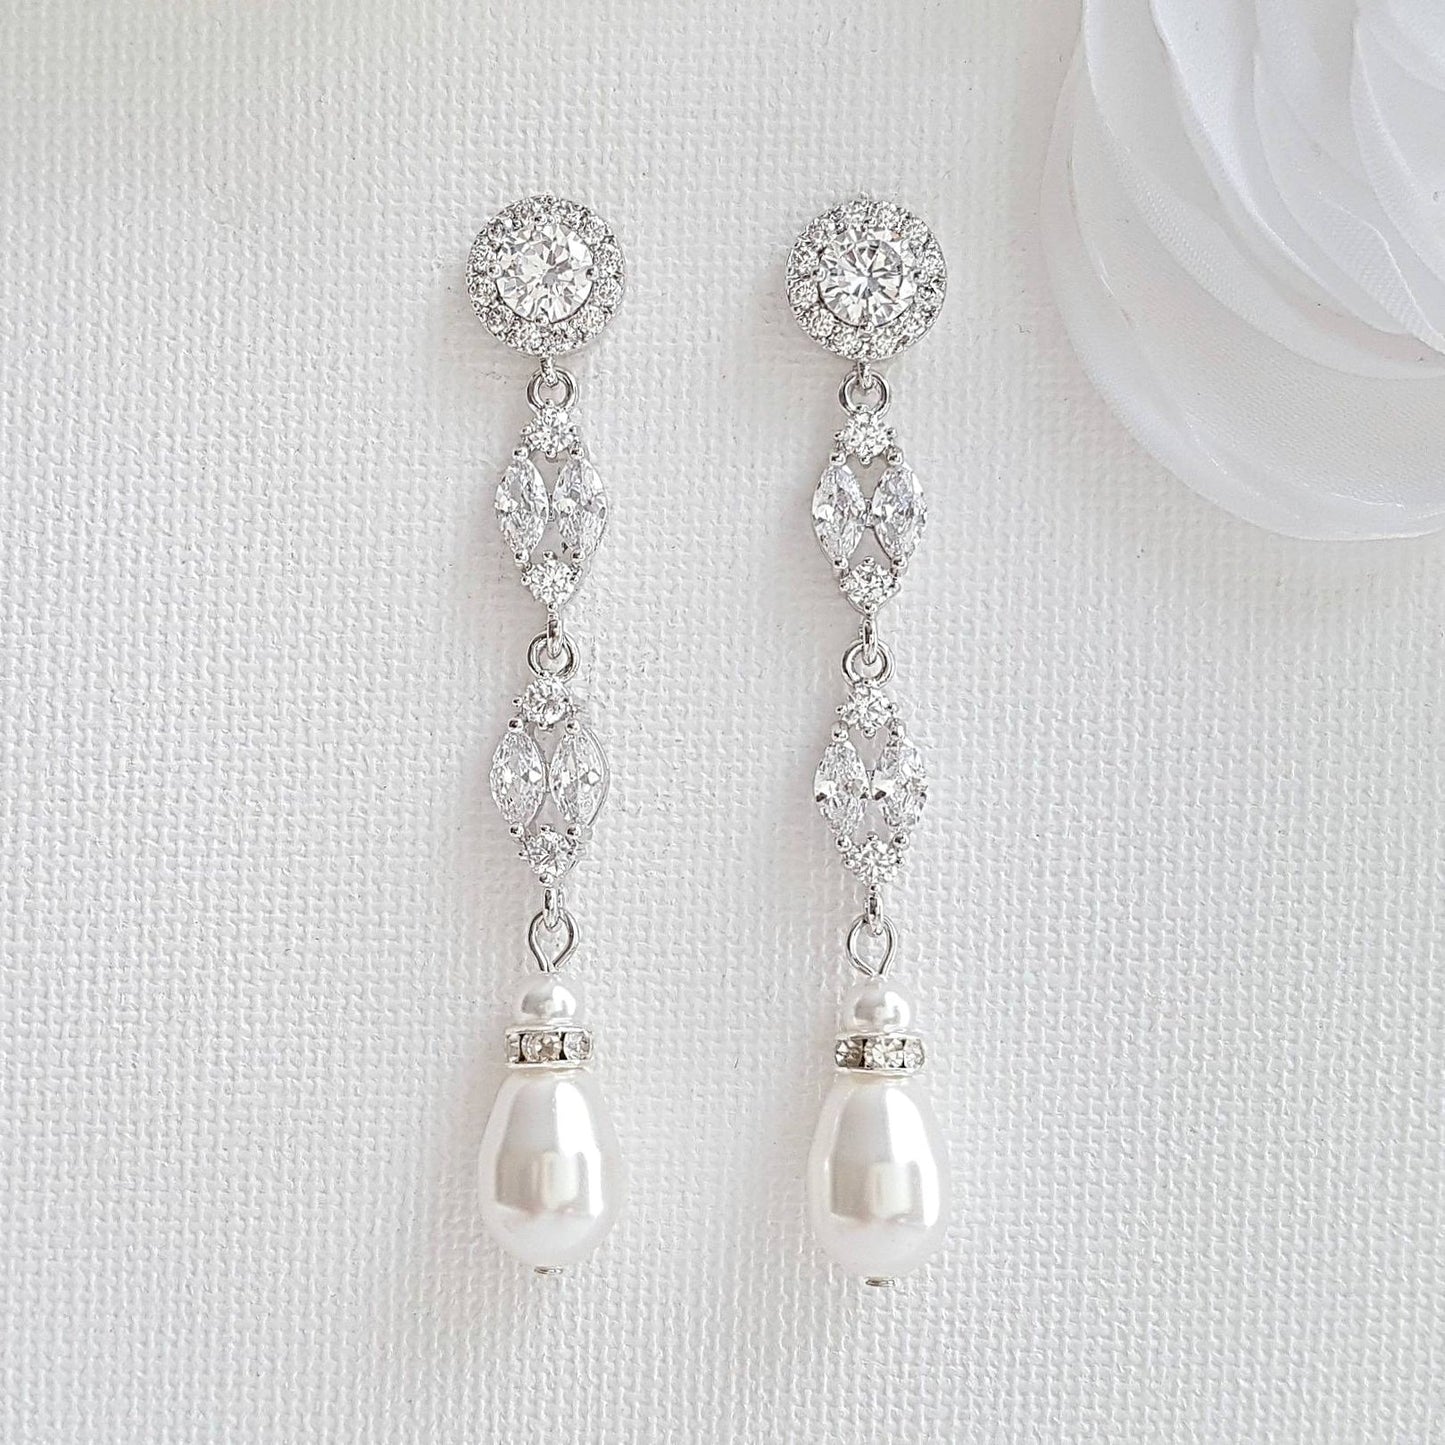 Clip On earrings for Brides and Weddings